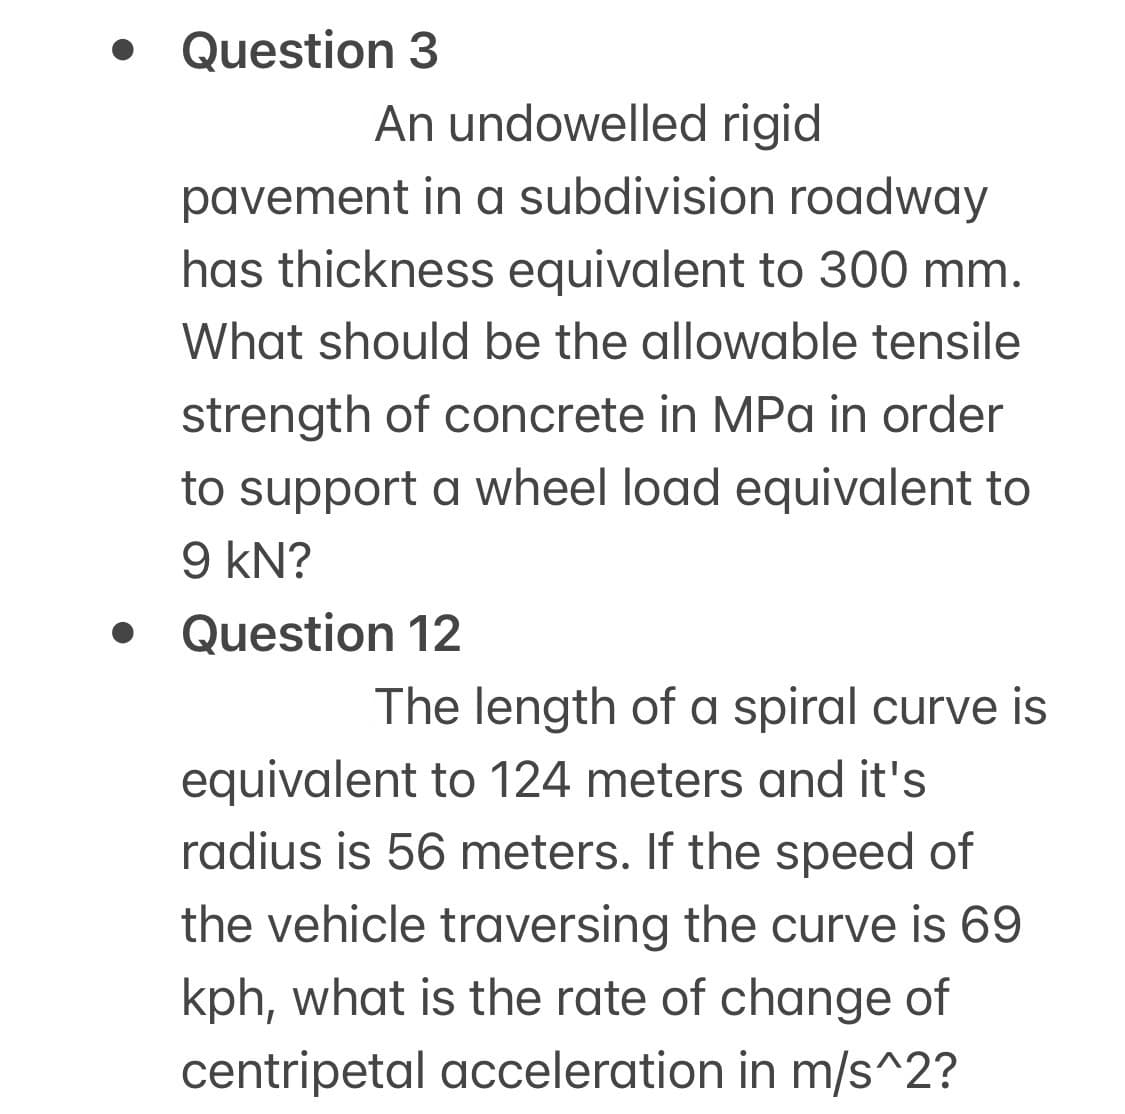 Question 3
An undowelled rigid
pavement in a subdivision roadway
has thickness equivalent to 300 mm.
What should be the allowable tensile
strength of concrete in MPa in order
to support a wheel load equivalent to
9 kN?
• Question 12
The length of a spiral curve is
equivalent to 124 meters and it's
radius is 56 meters. If the speed of
the vehicle traversing the curve is 69
kph, what is the rate of change of
centripetal acceleration in m/s^2?
